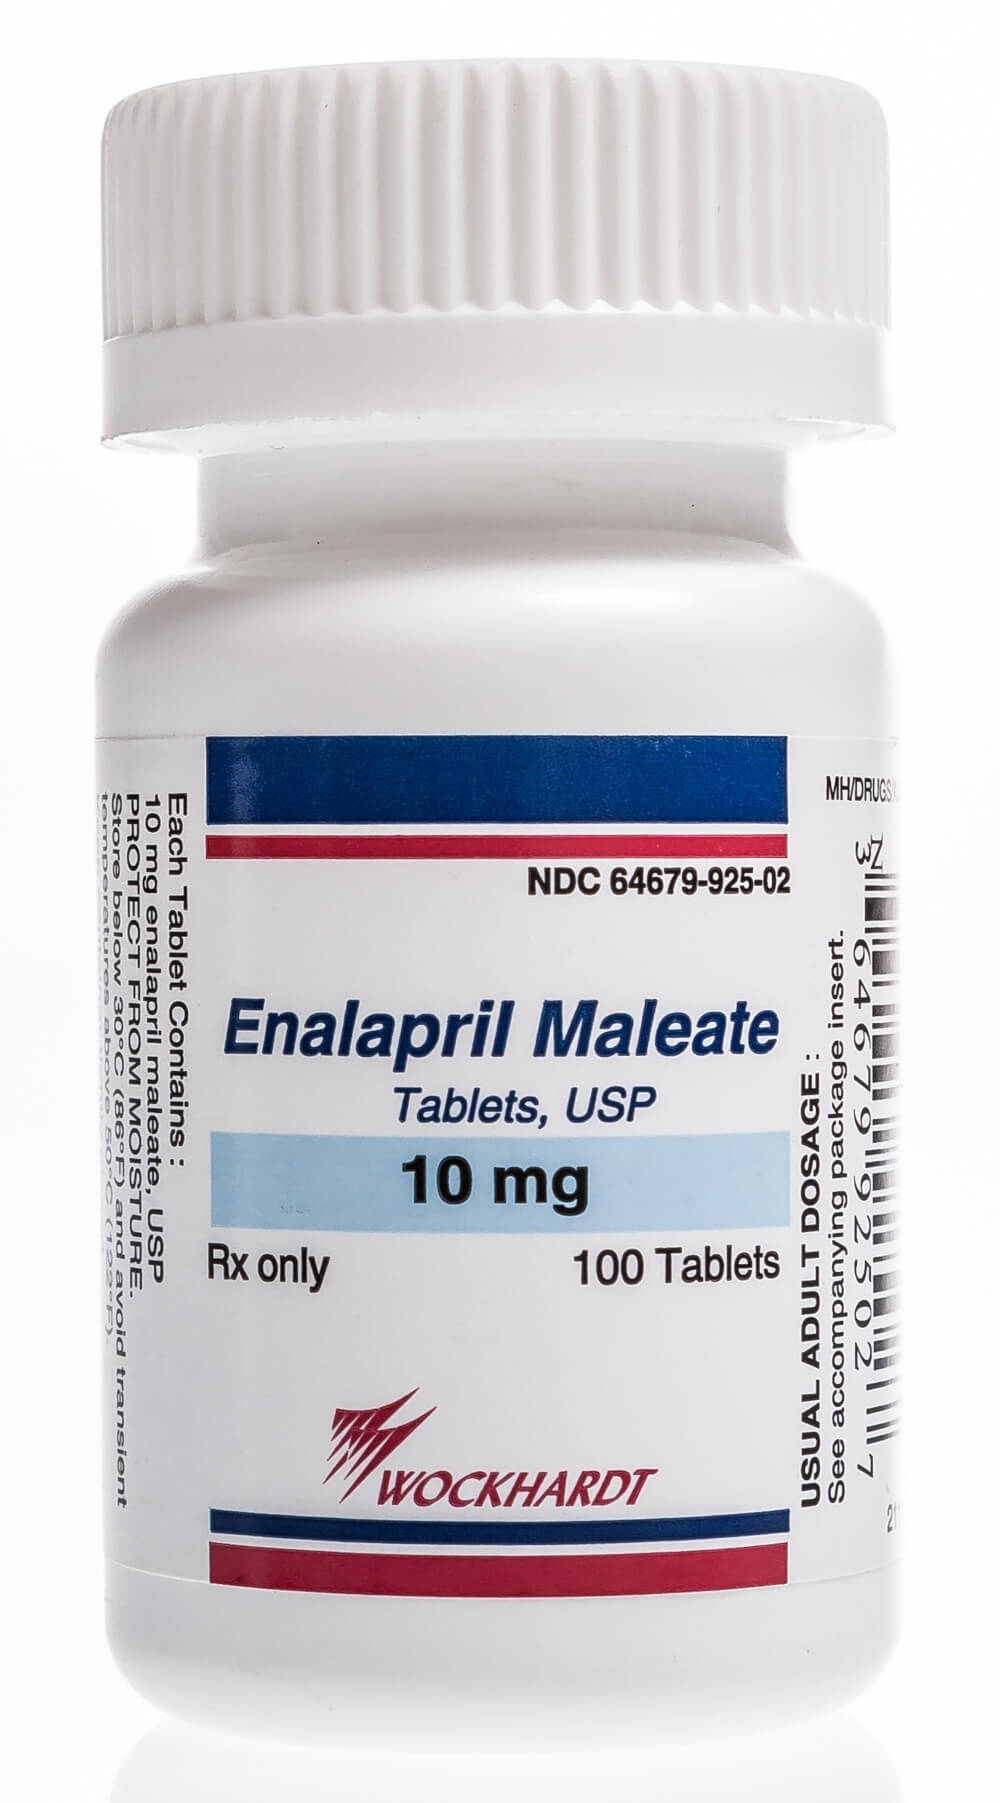 enalapril maleate 10 mg used for